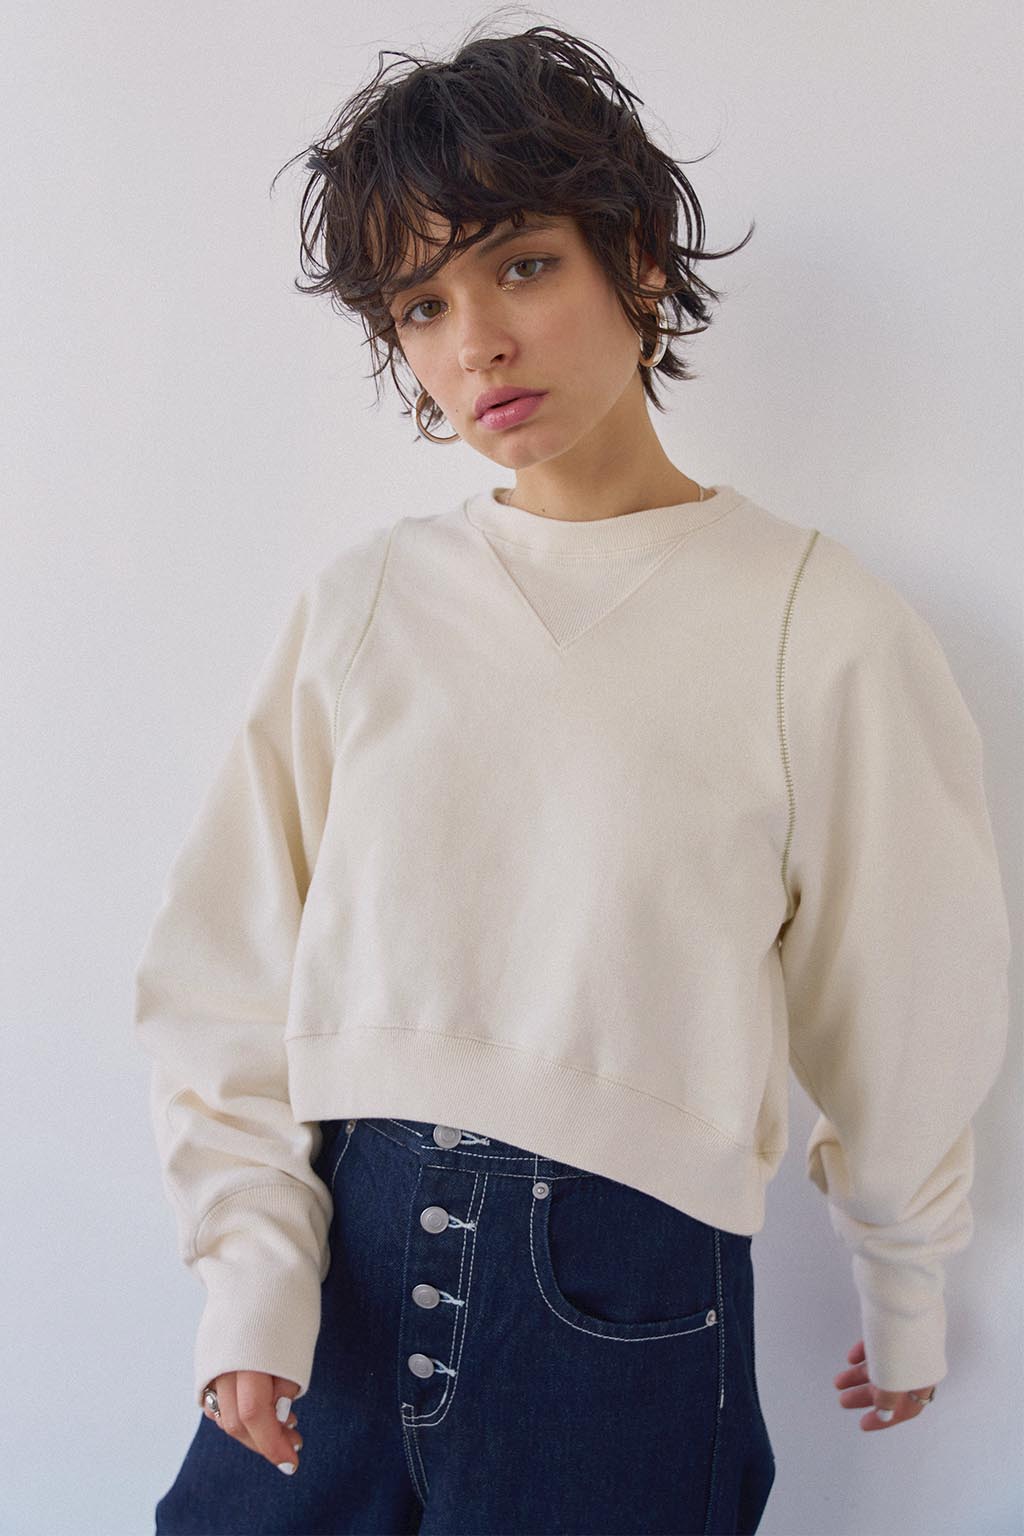 ALEXIA STAM Long Sleeve Cropped Sweat